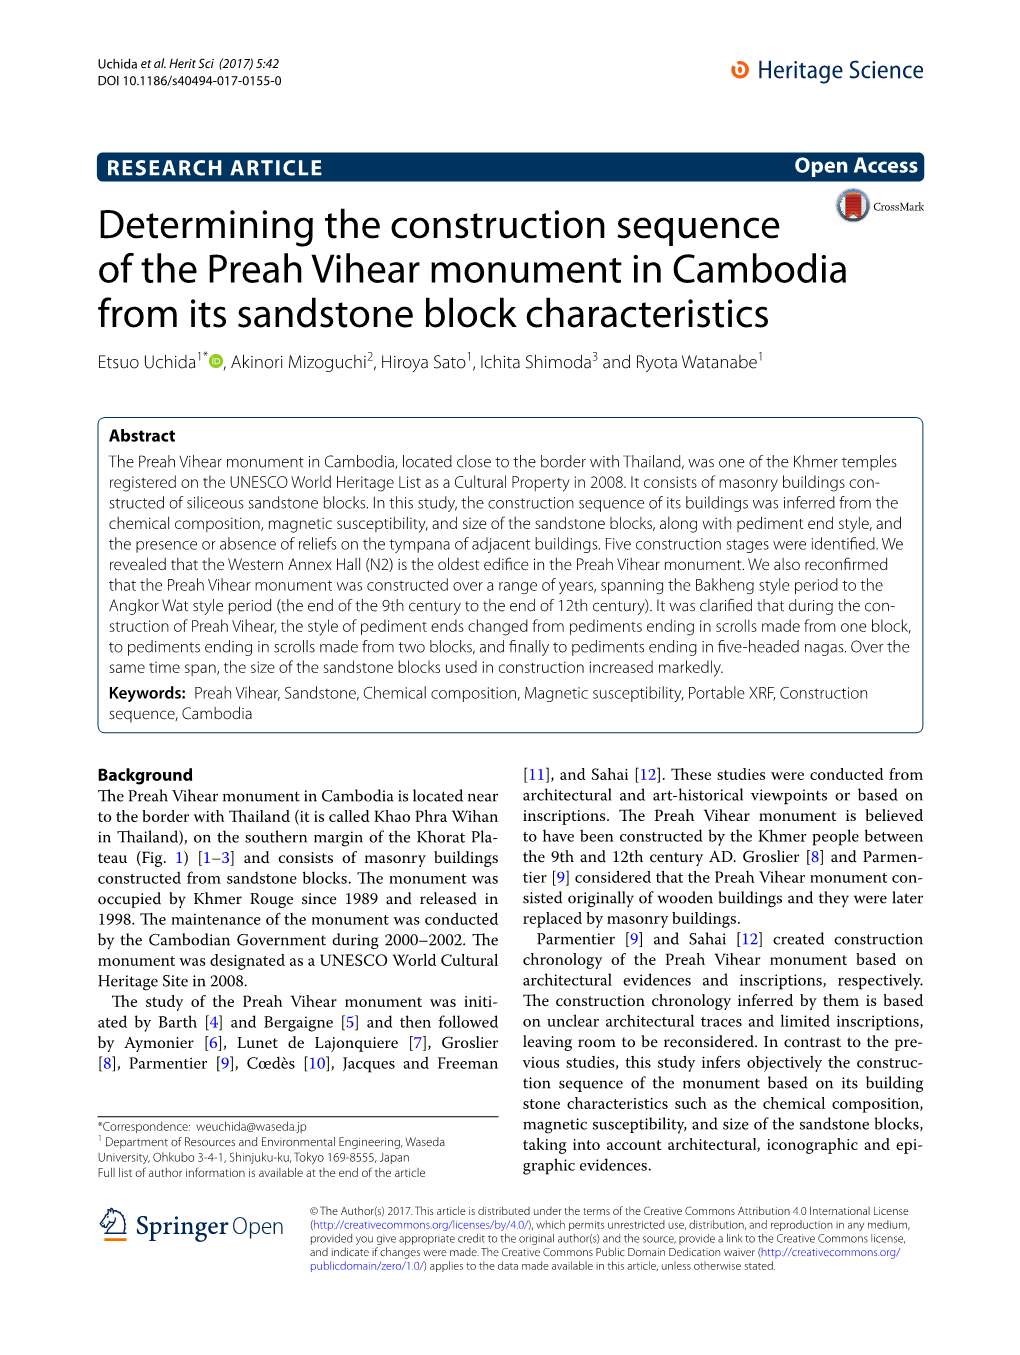 Determining the Construction Sequence of The